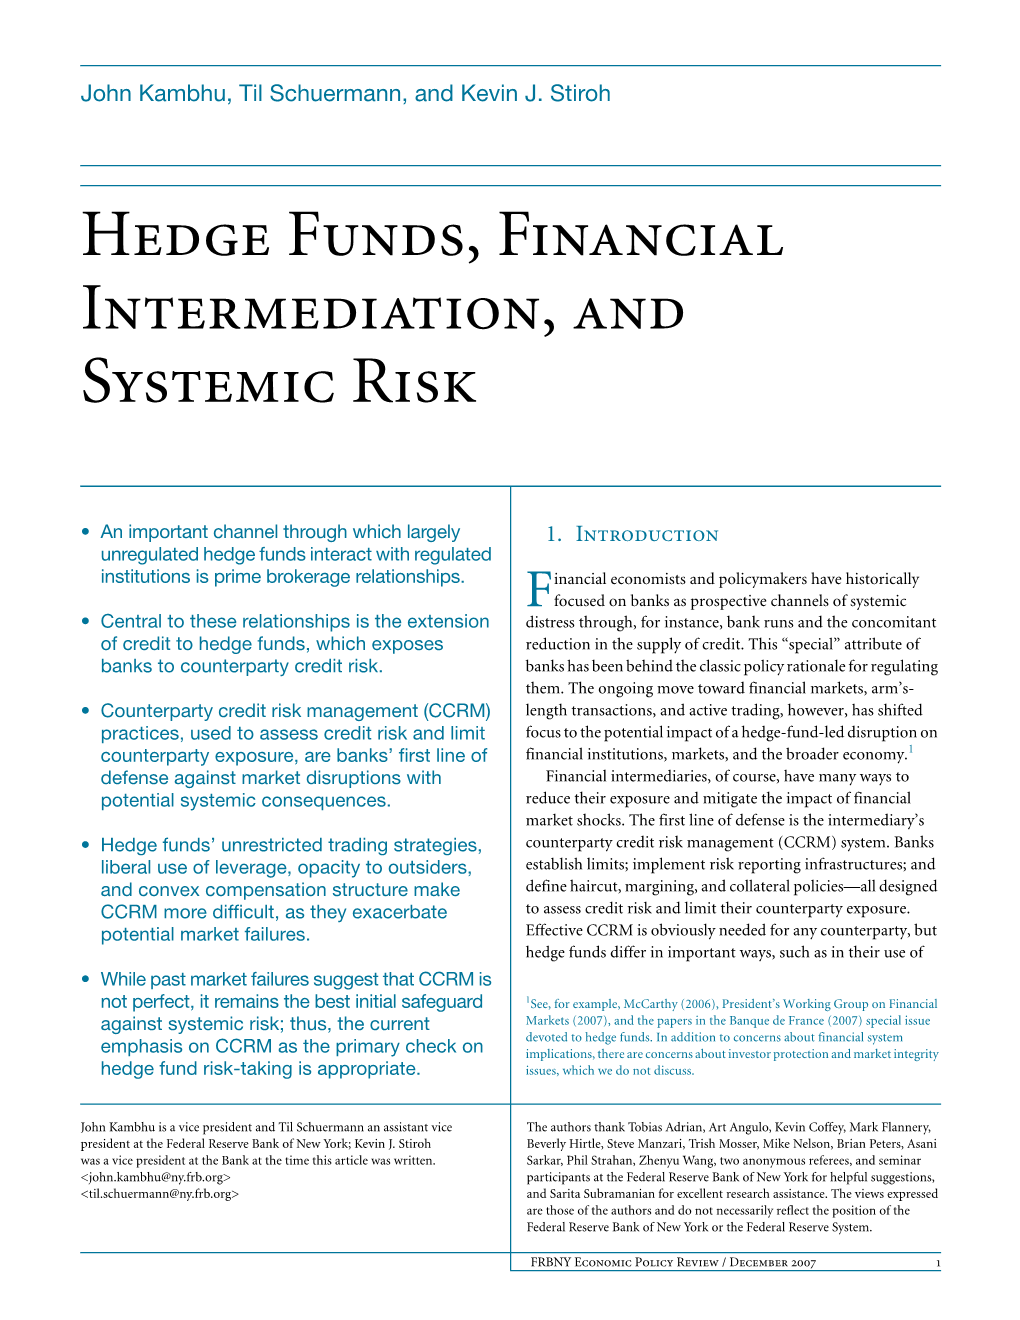 Hedge Funds, Financial Intermediation, and Systemic Risk